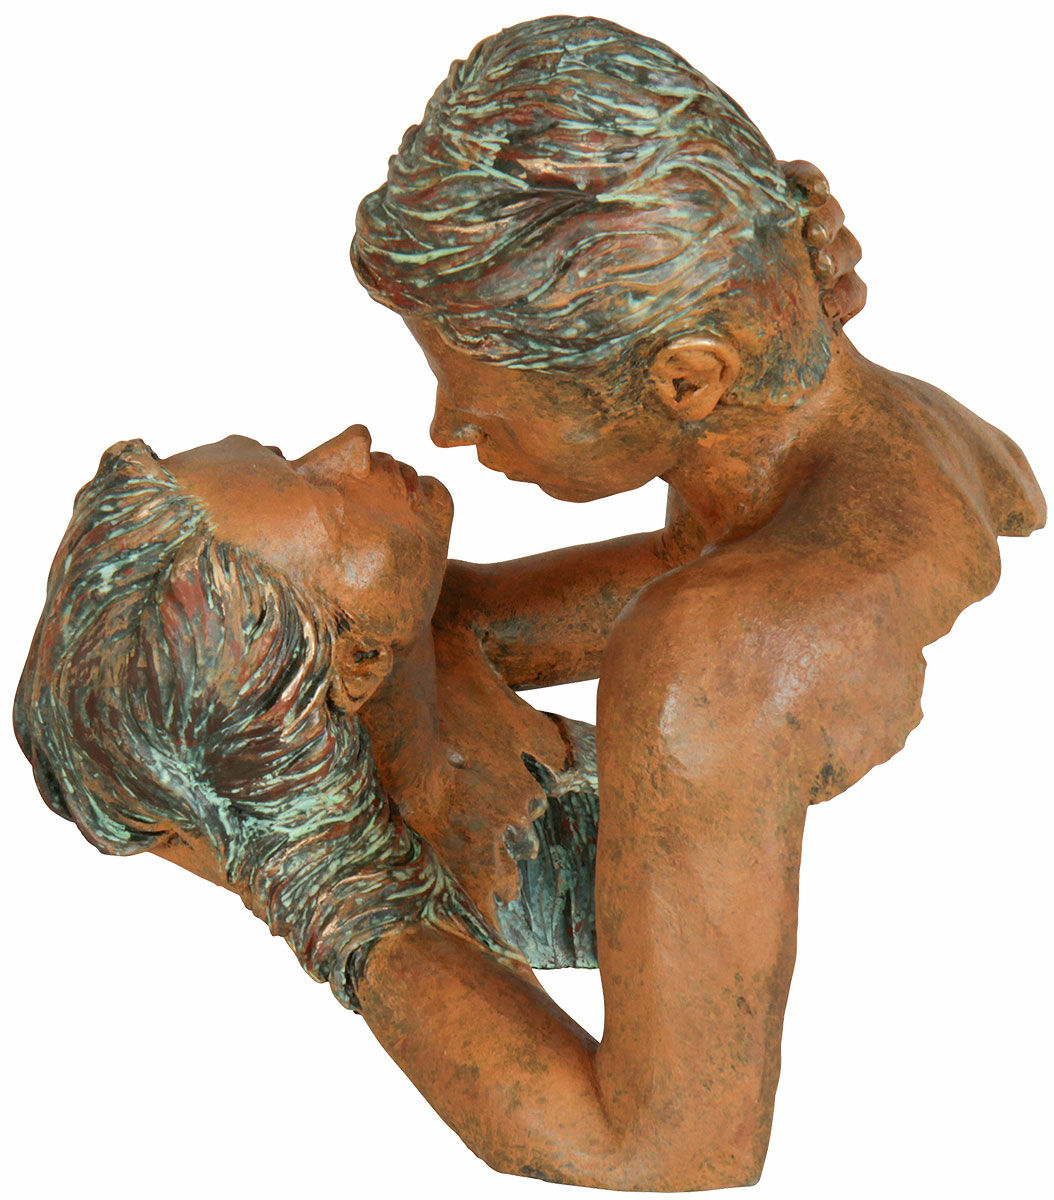 Sculpture "Passion", artificial stone by Angeles Anglada